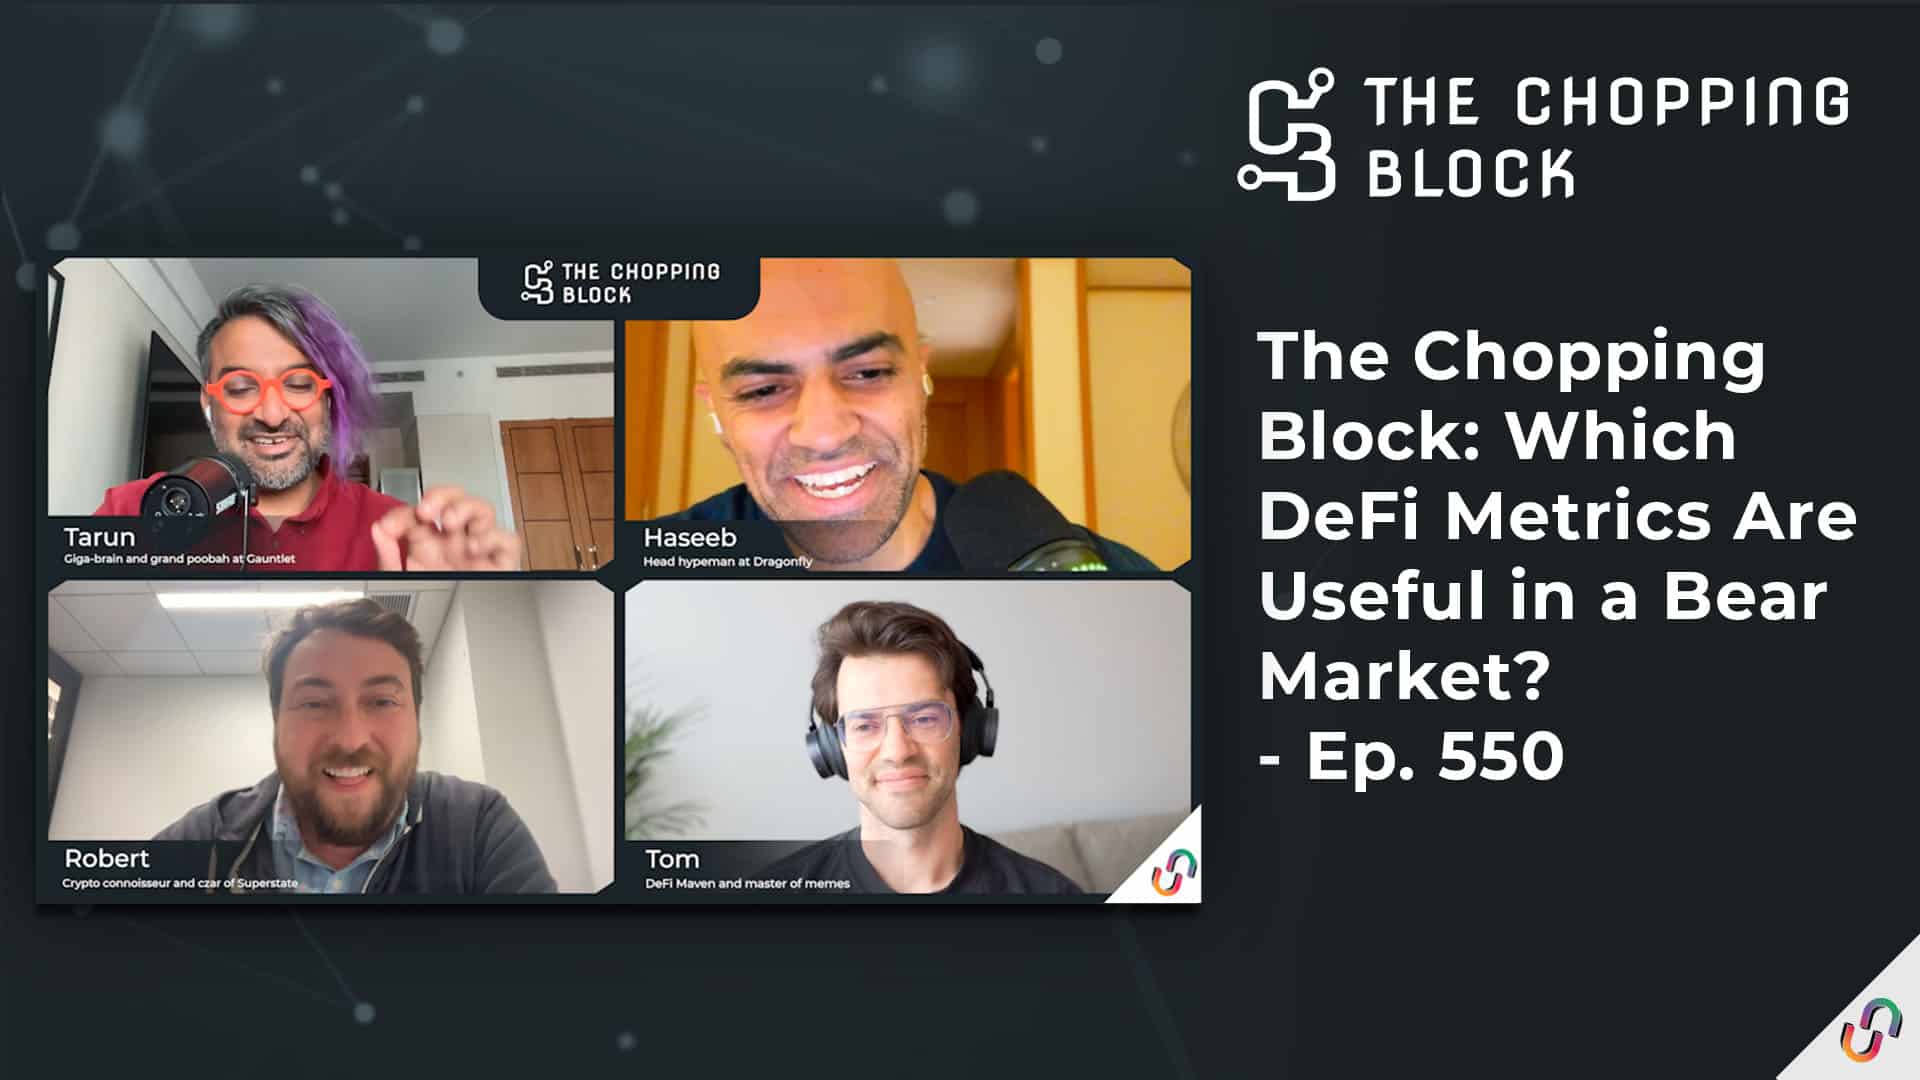 The Chopping Block: Which DeFi Metrics Are Still Useful in a Bear Market? - Ep. 550